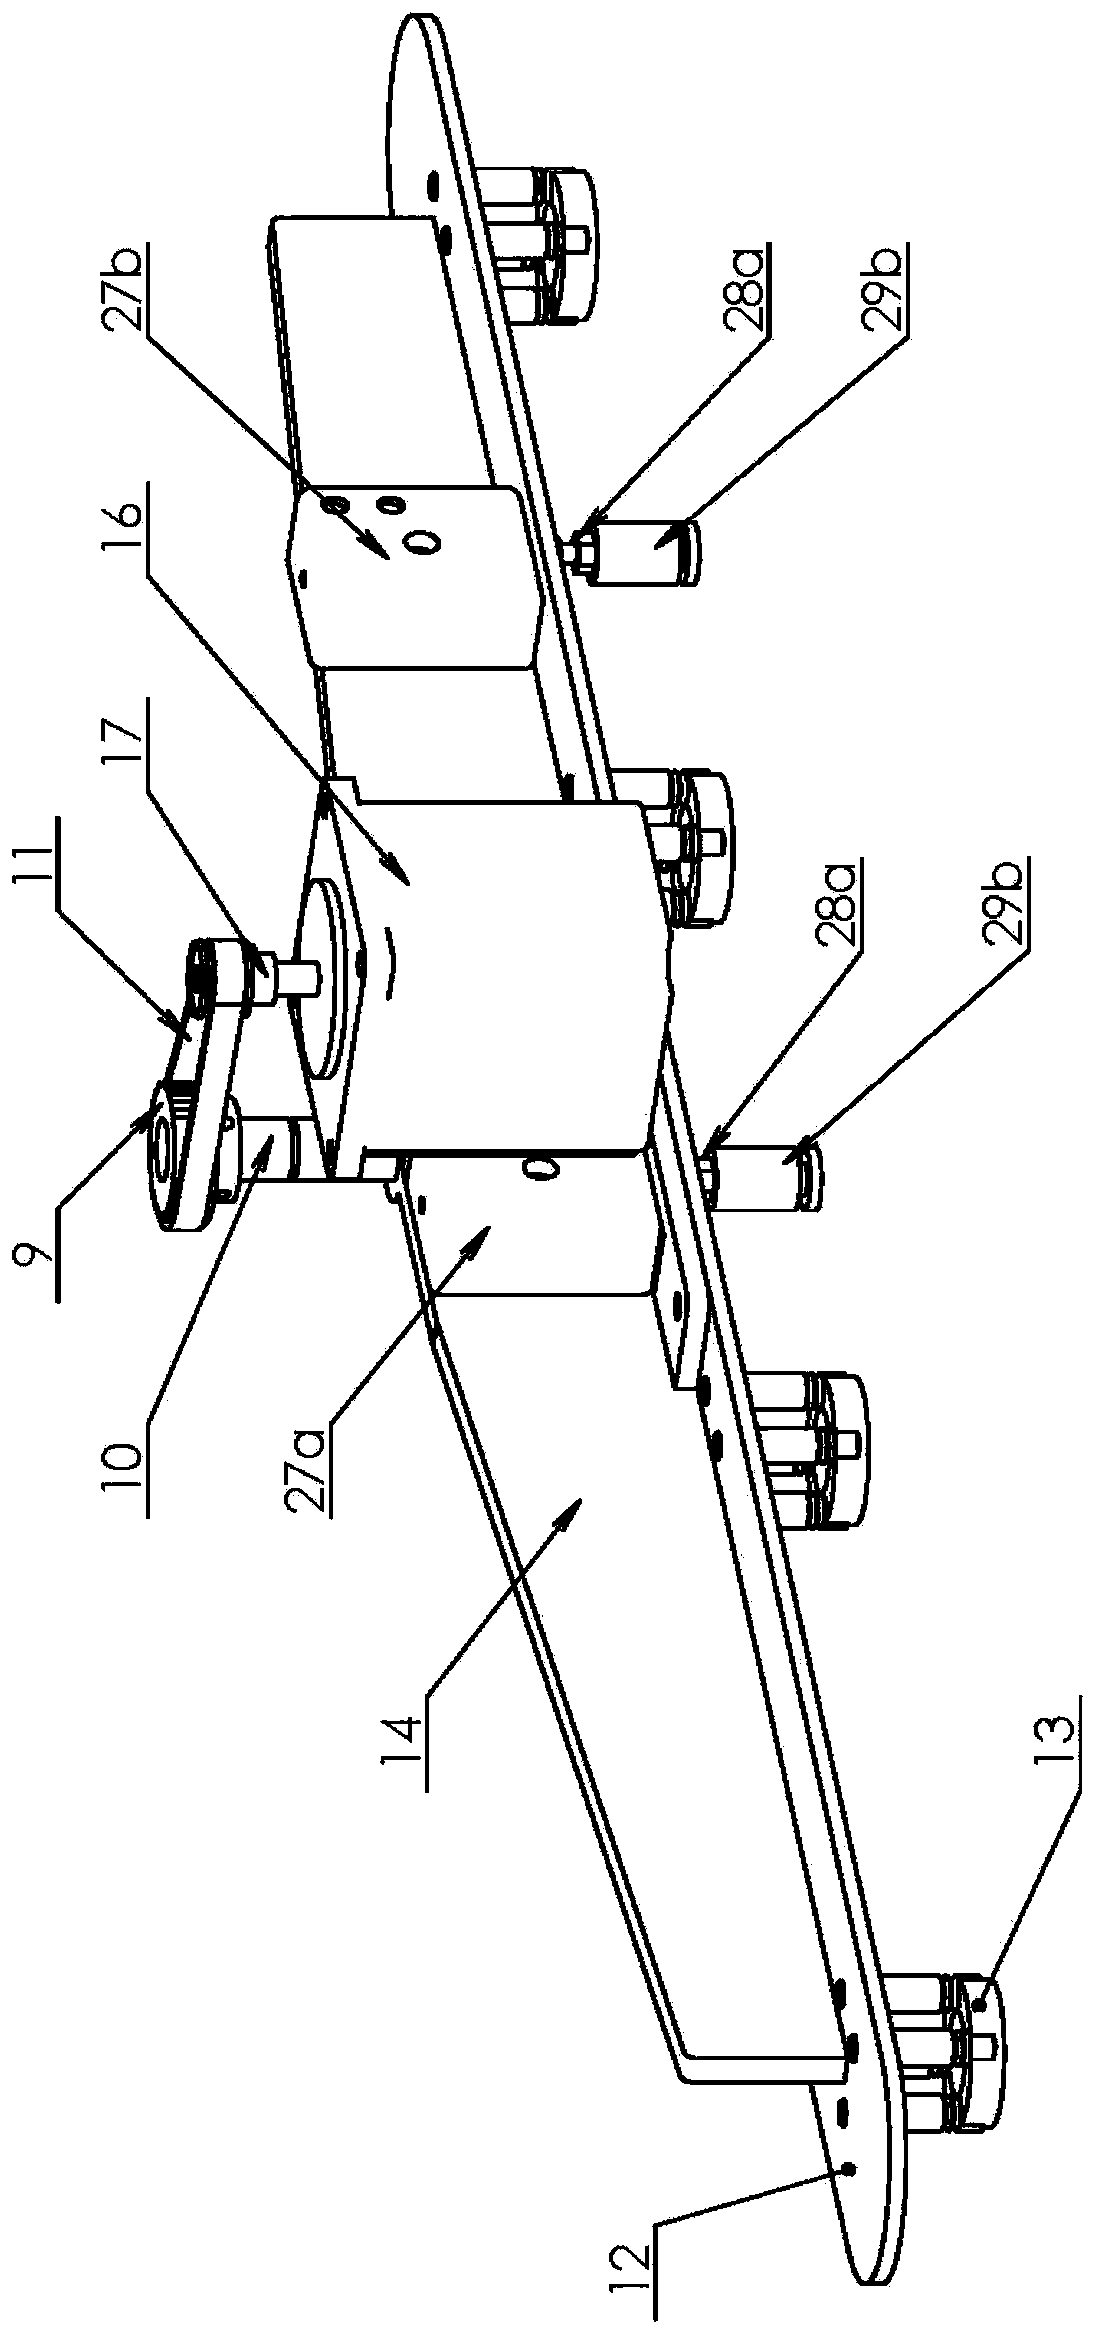 Cloth taking device for sewing machine capable of taking and feeding cloth fully automatically